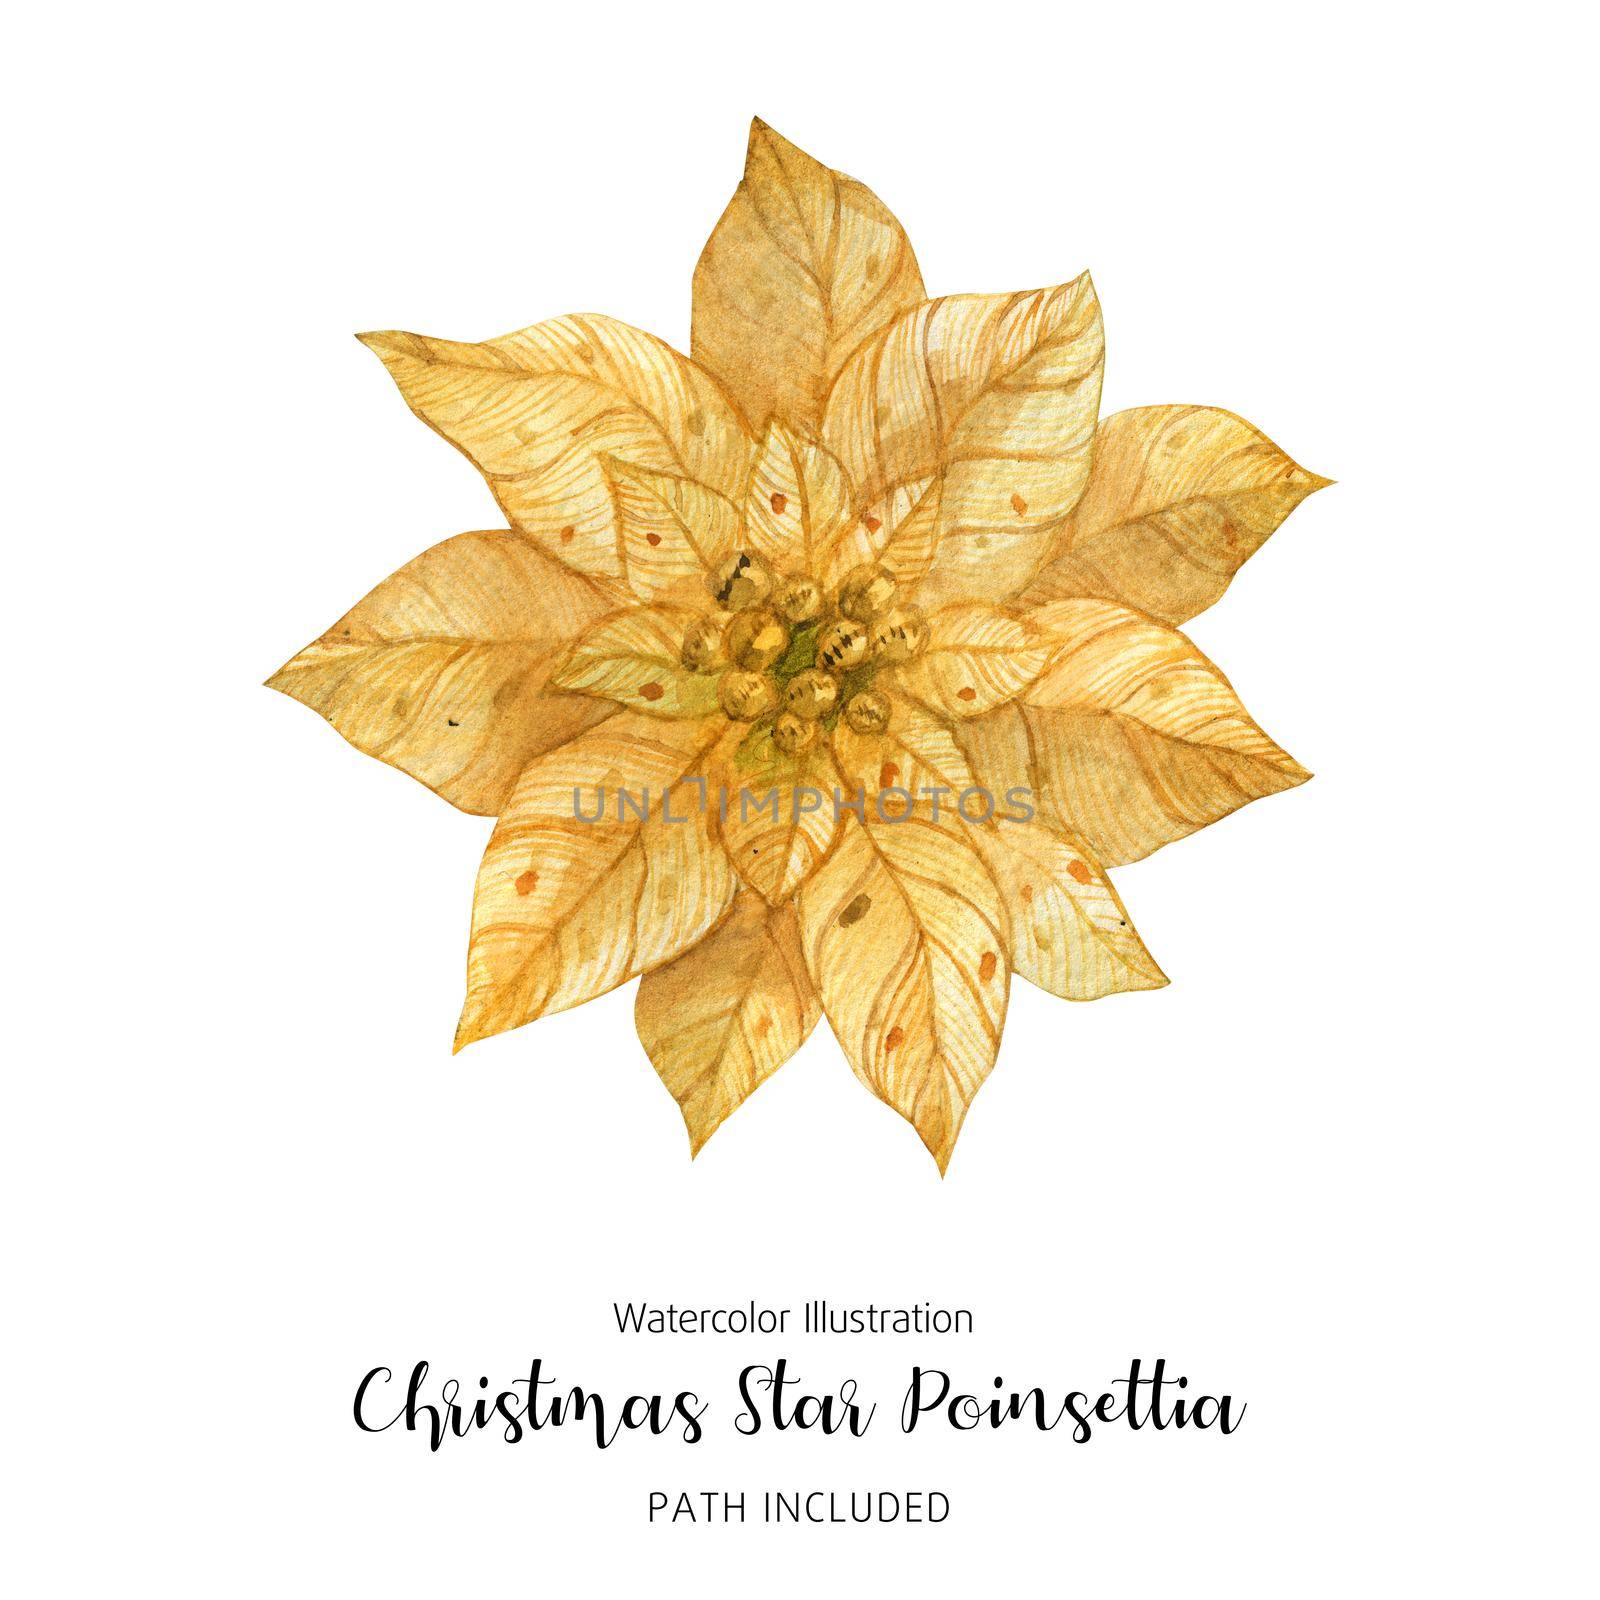 Poinsettia Gold Christmas Star Flower, watercolor hand-made illustration